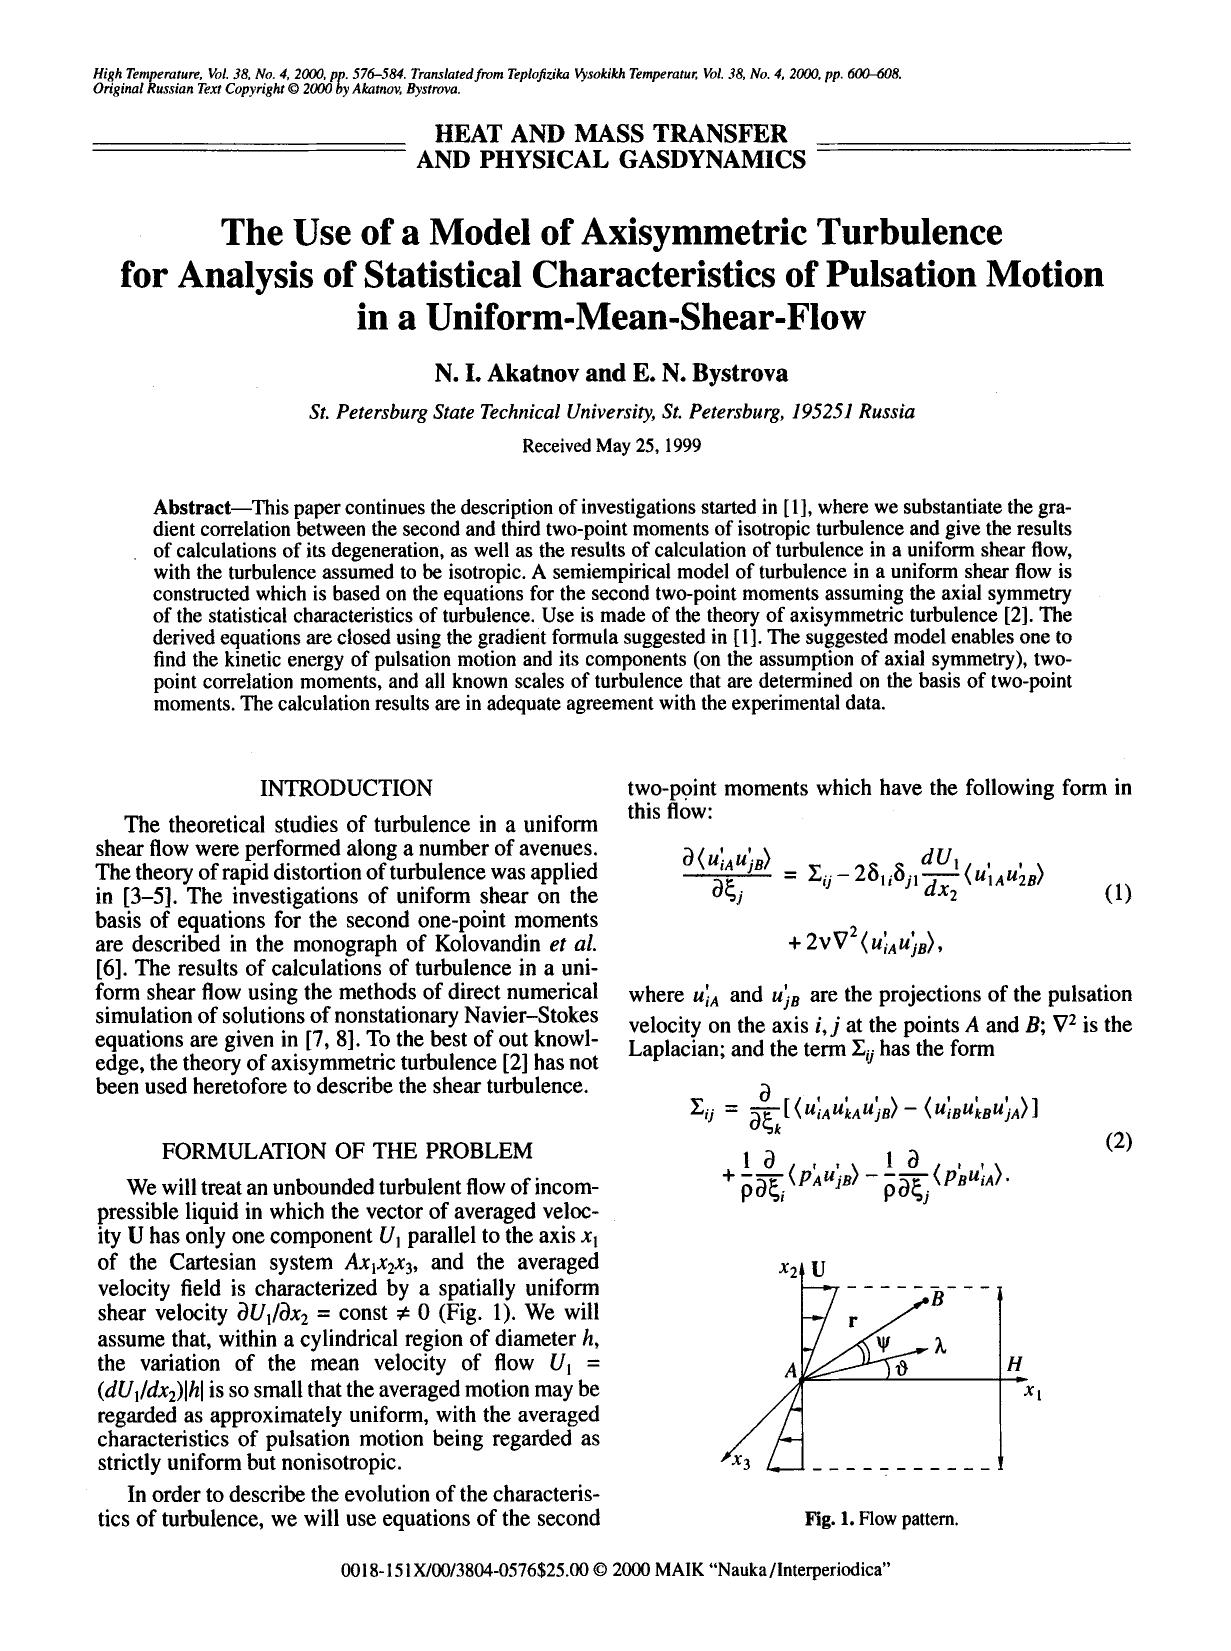 The use of a model of axisymmetric turbulence for analysis of statistical characteristics of pulsation motion in a uniform-mean-shear-flow by Unknown